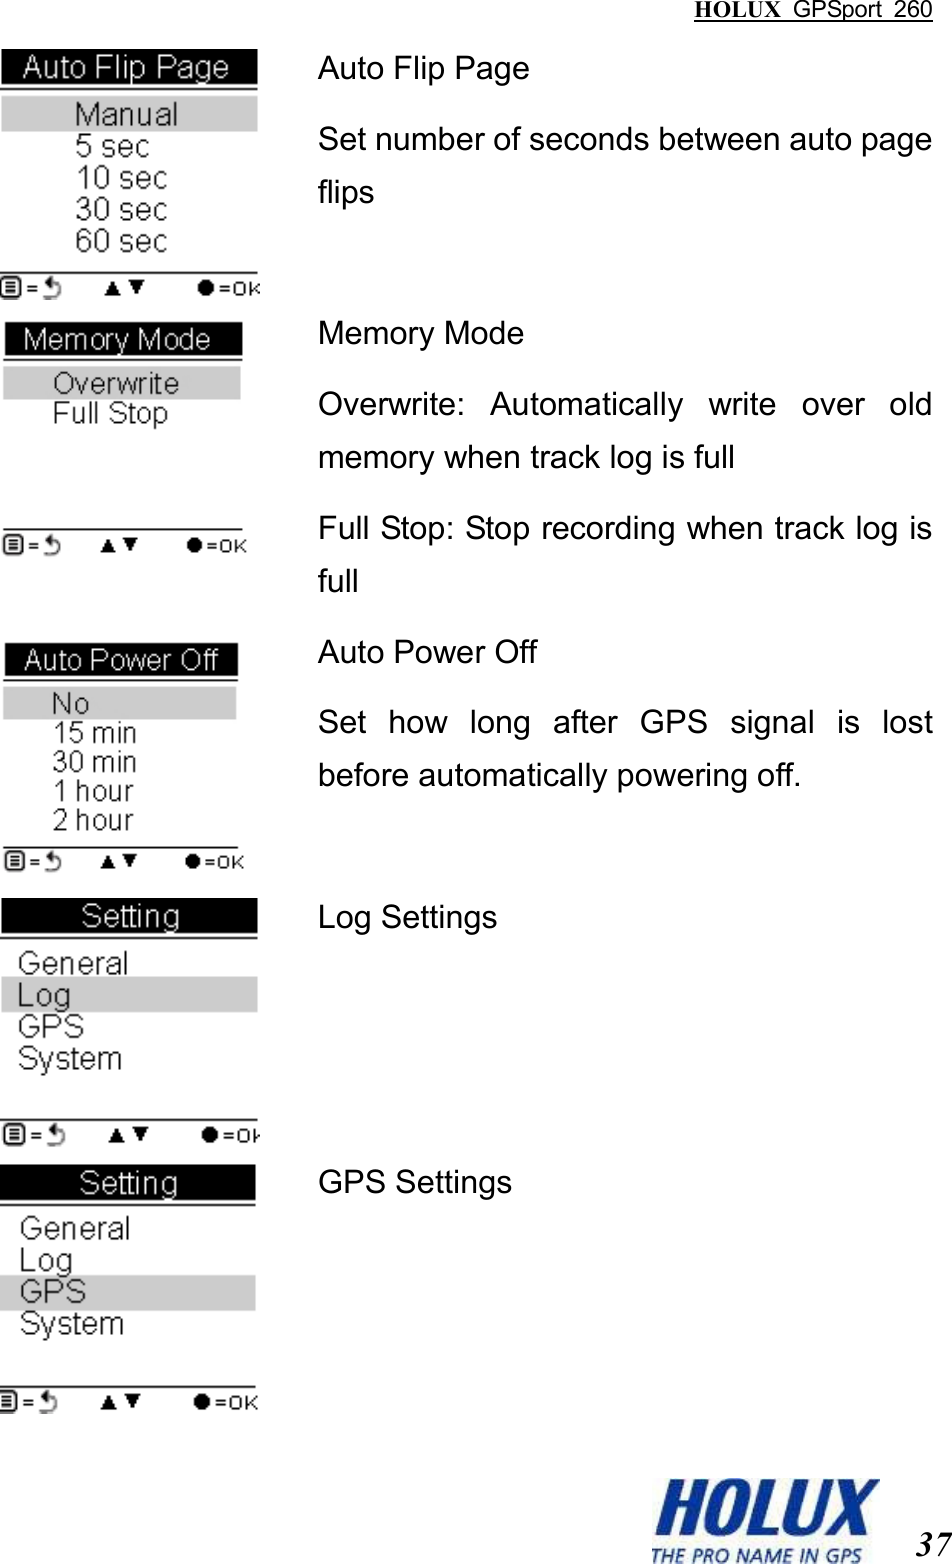 HOLUX  GPSport  260  37  Auto Flip Page Set number of seconds between auto page flips  Memory Mode Overwrite:  Automatically  write  over  old memory when track log is full Full Stop: Stop recording when track log is full  Auto Power Off Set  how  long  after  GPS  signal  is  lost before automatically powering off.  Log Settings  GPS Settings 